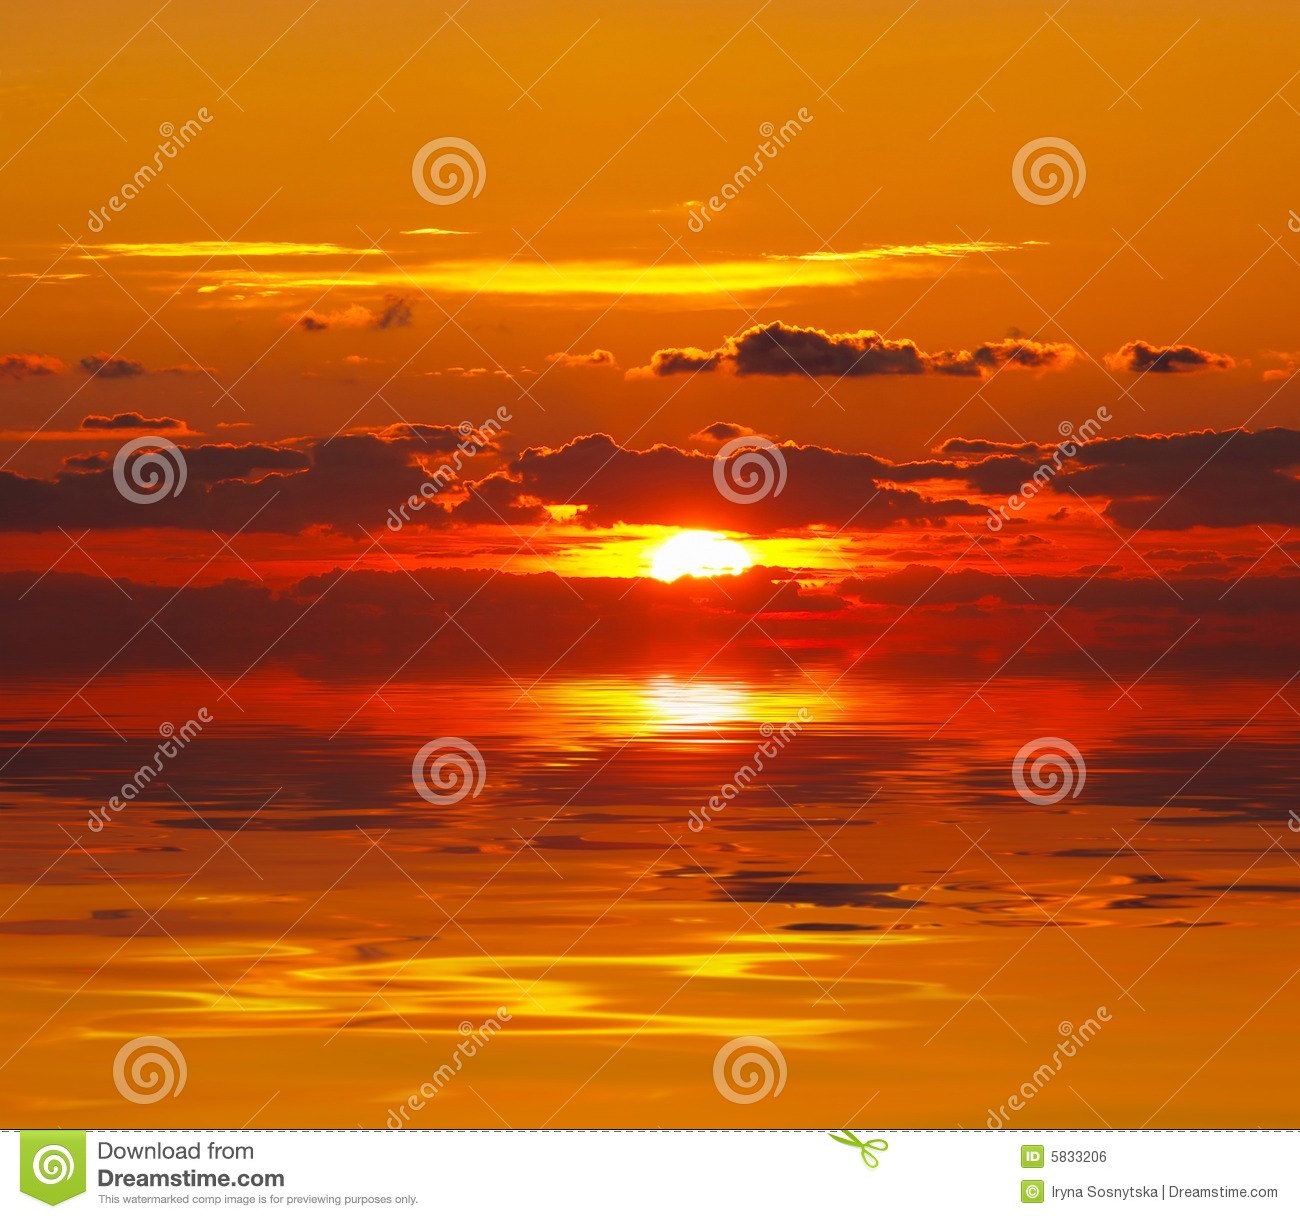 Sunset Over Water Clipart.